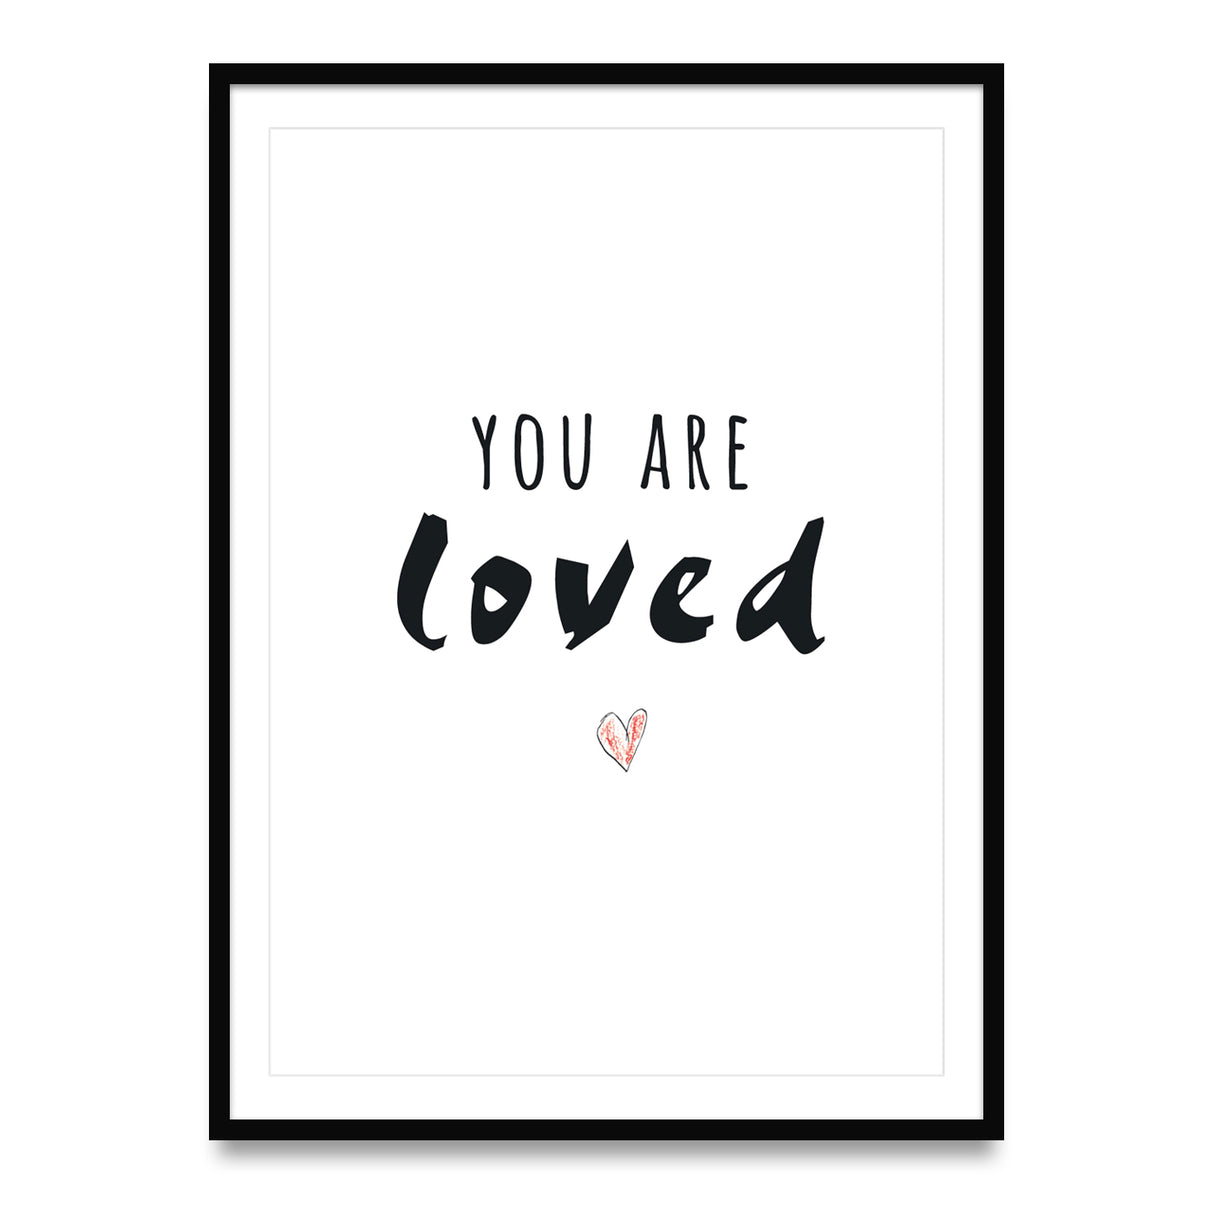 You are loved - Poster